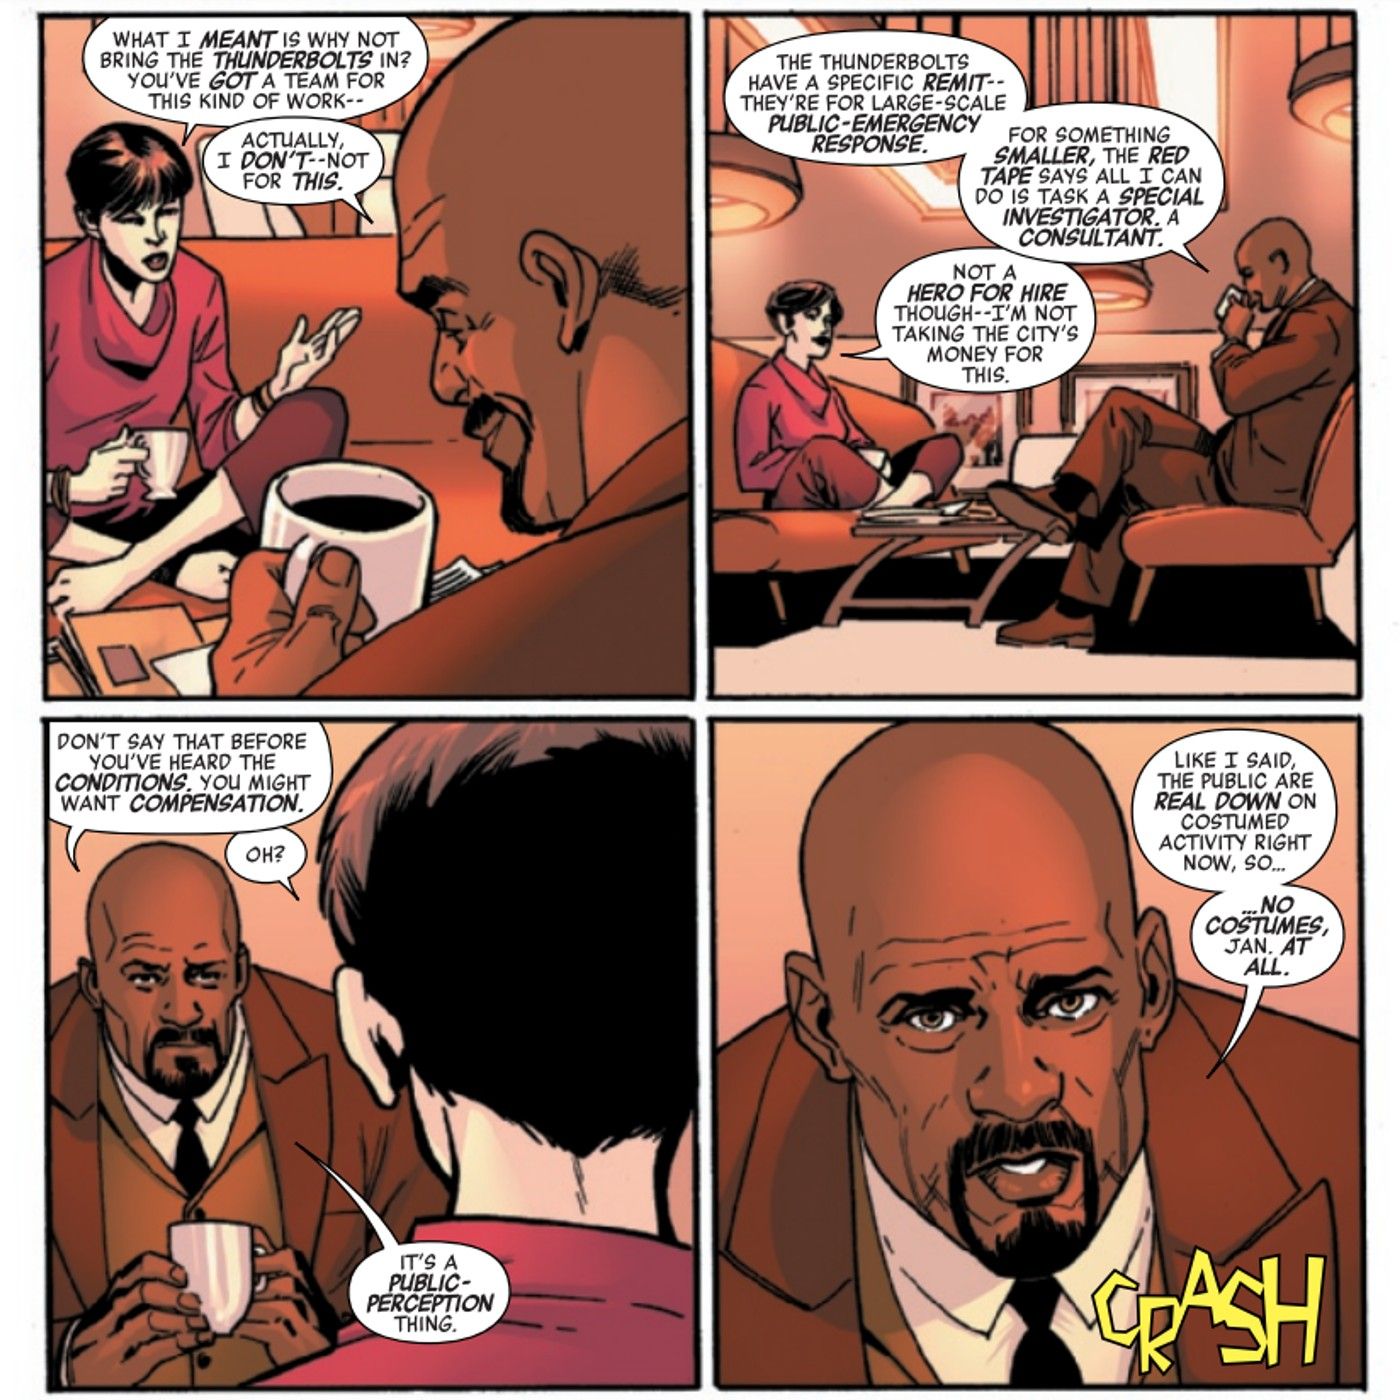 Mayor Luke Cage and The Wasp talk in Marvel's Avengers Inc